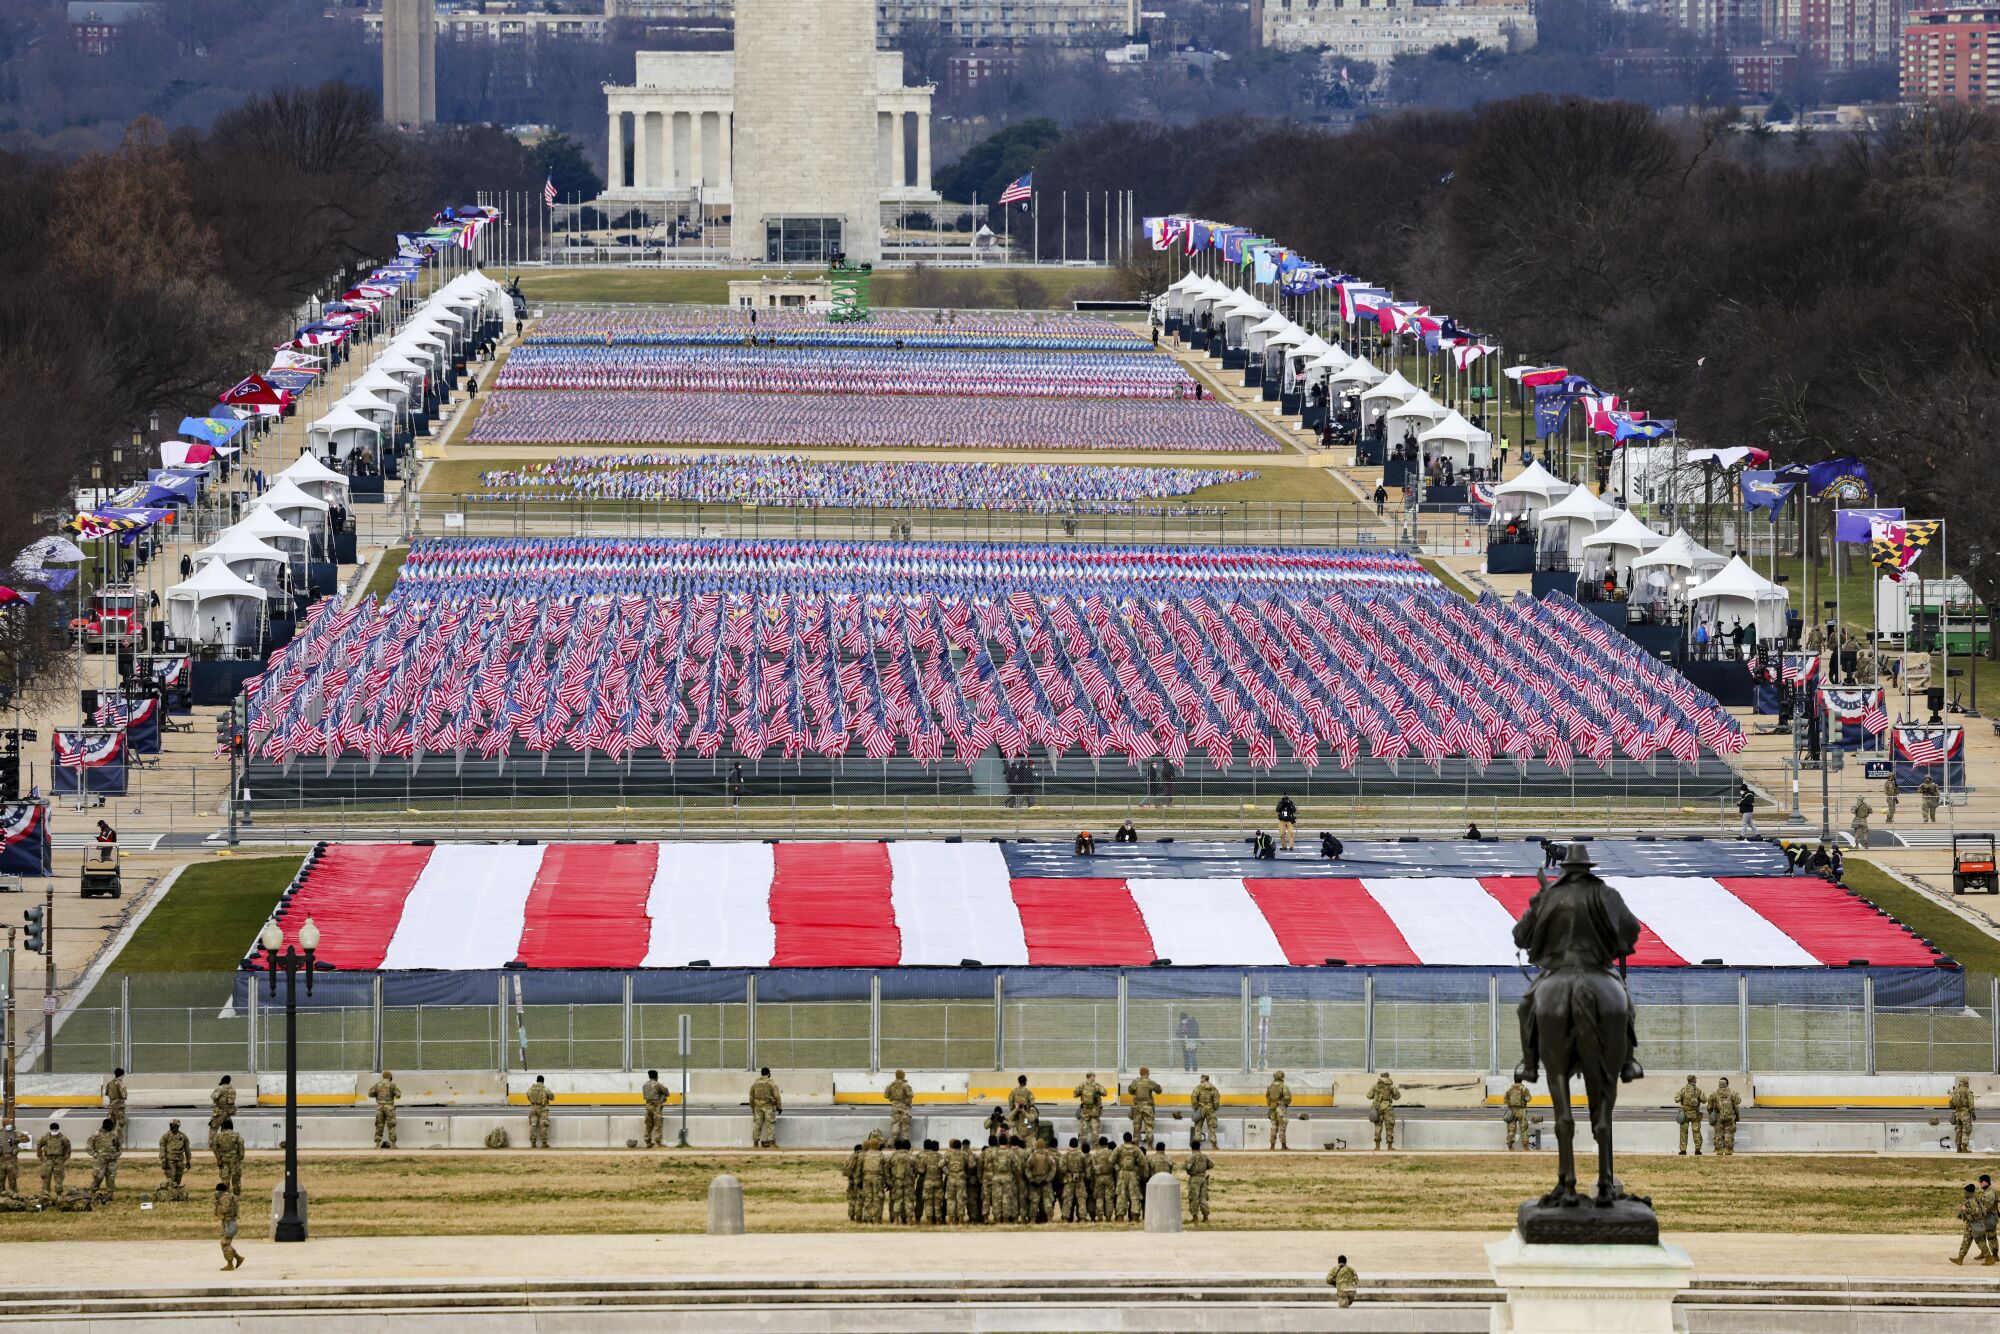 National Guard members look on as U.S. flags adorn the "Field of Flags" at the National Mall.